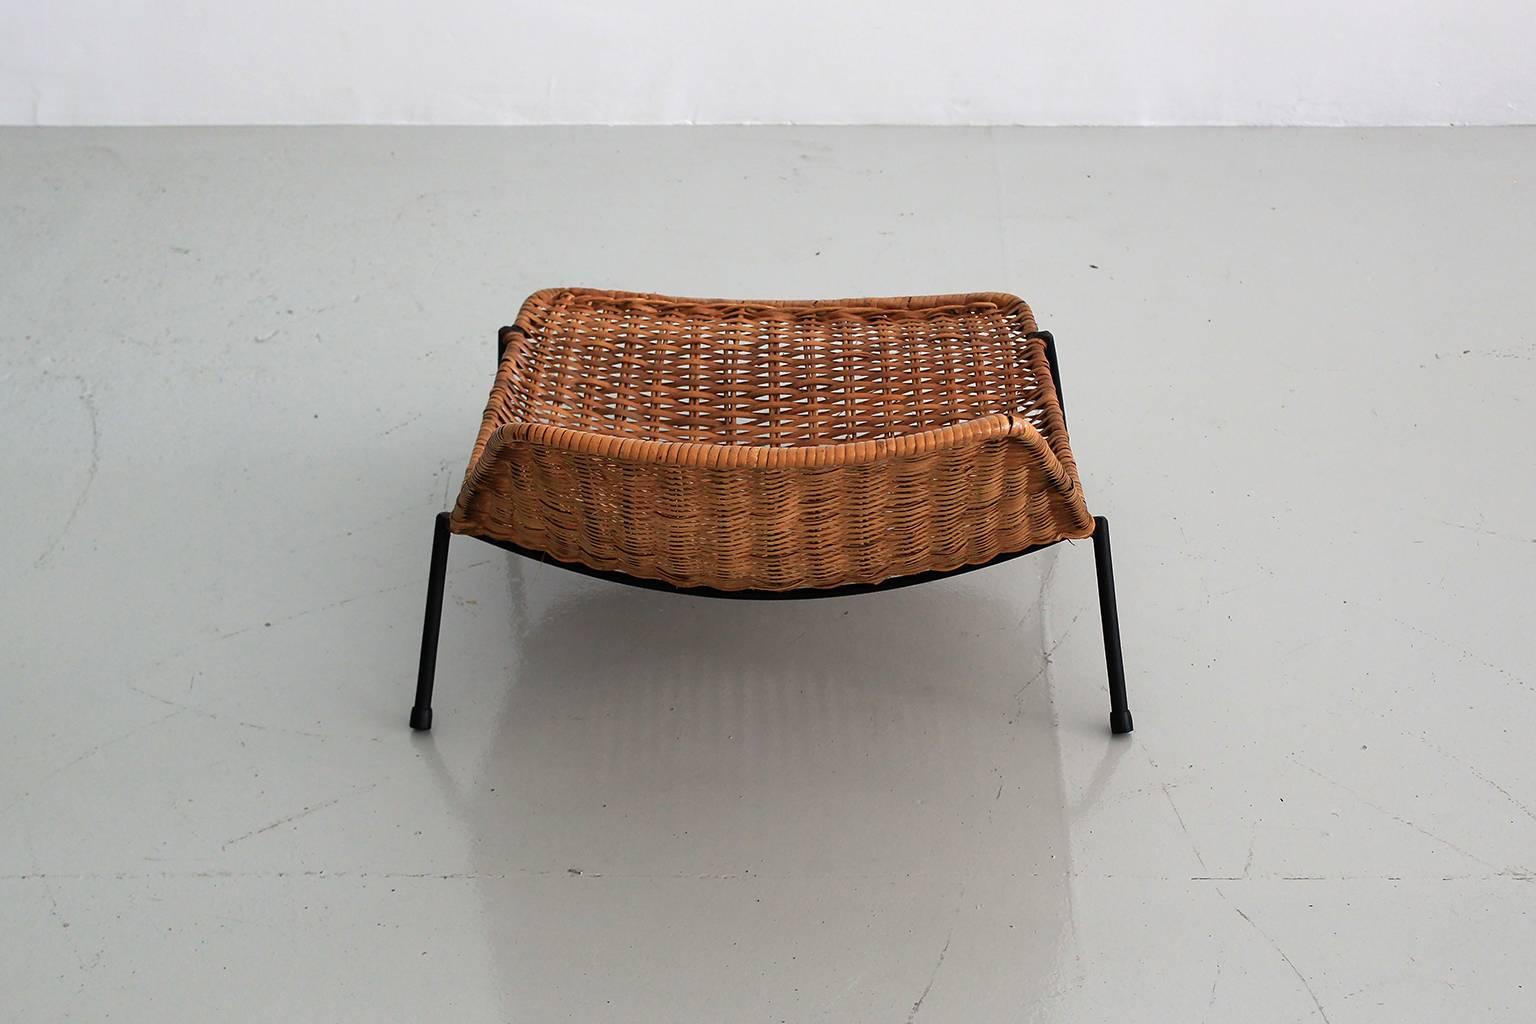 Woven Wicker Pool Chairs  3